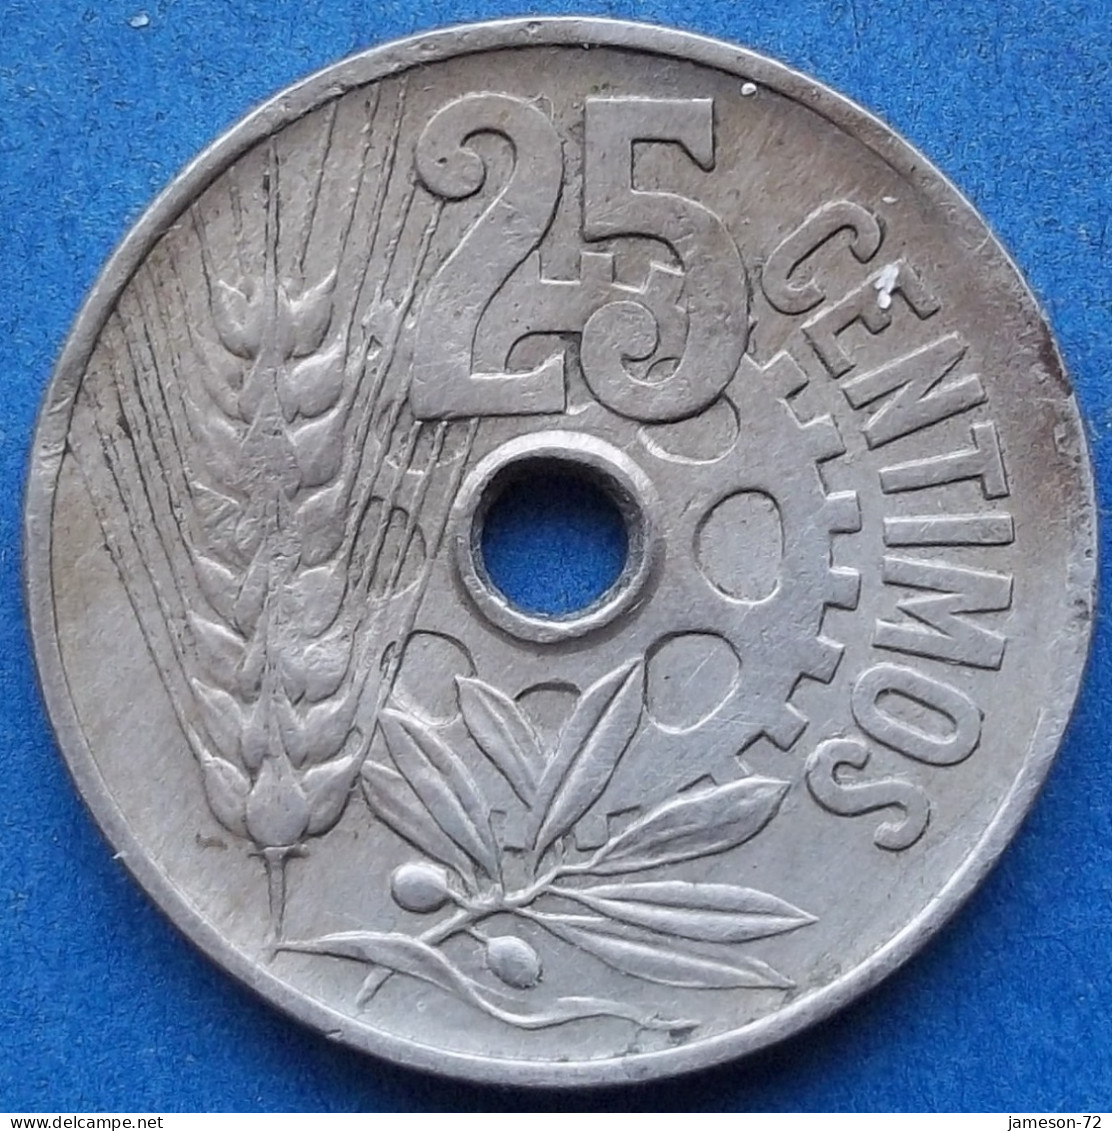 SPAIN - 25 Centimos 1934 "Republic Holding A Olive Branch" KM# 751 II Republic (1931-1939) - Edelweiss Coins - 25 Centesimi